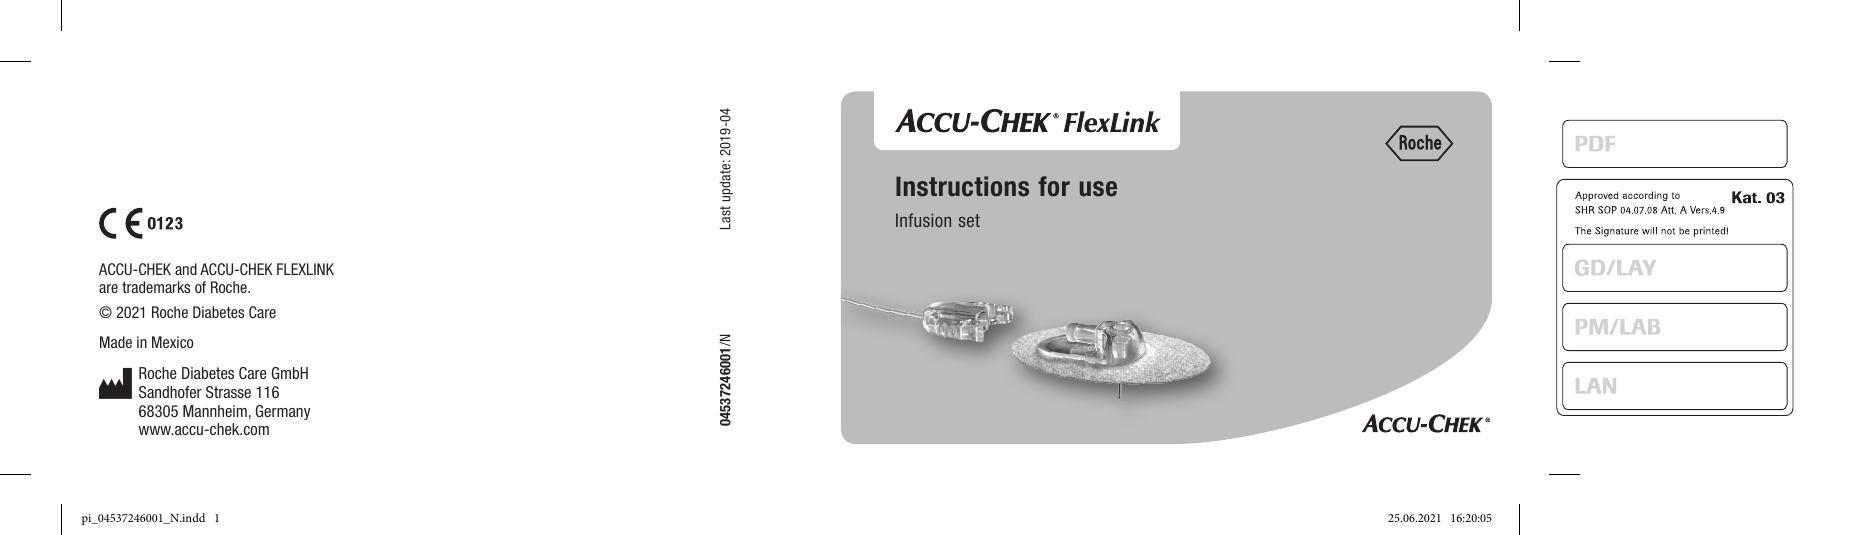 instructions-for-use-accu-chek-flexlink-infusion-set.pdf